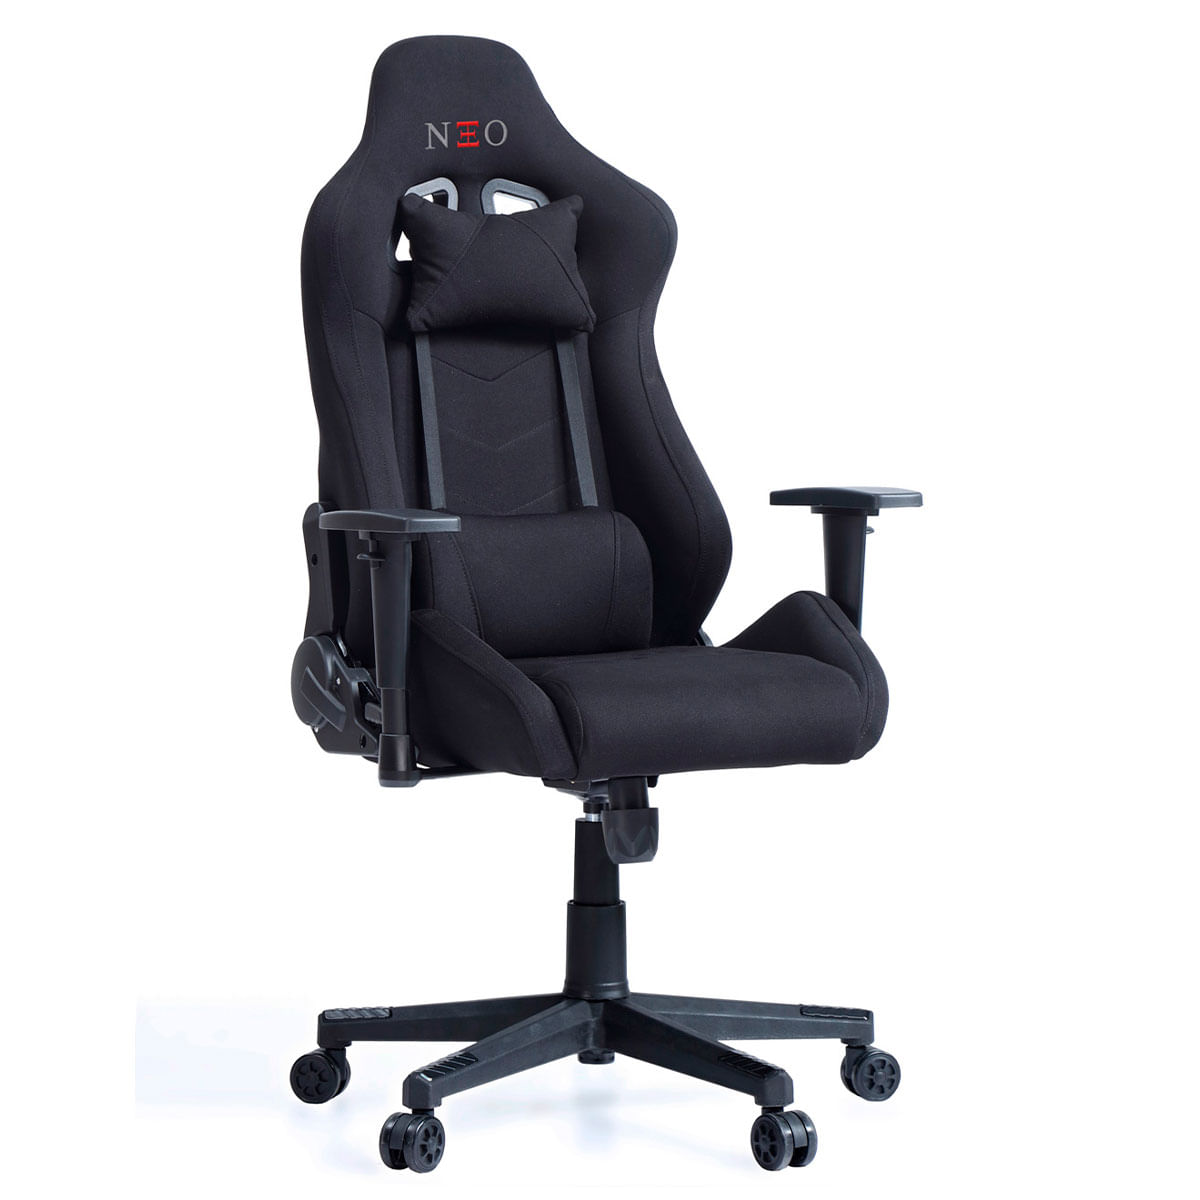 Adec - Silla gaming Neo Advance reclinable y altura regulable 124-134x70x70 cm